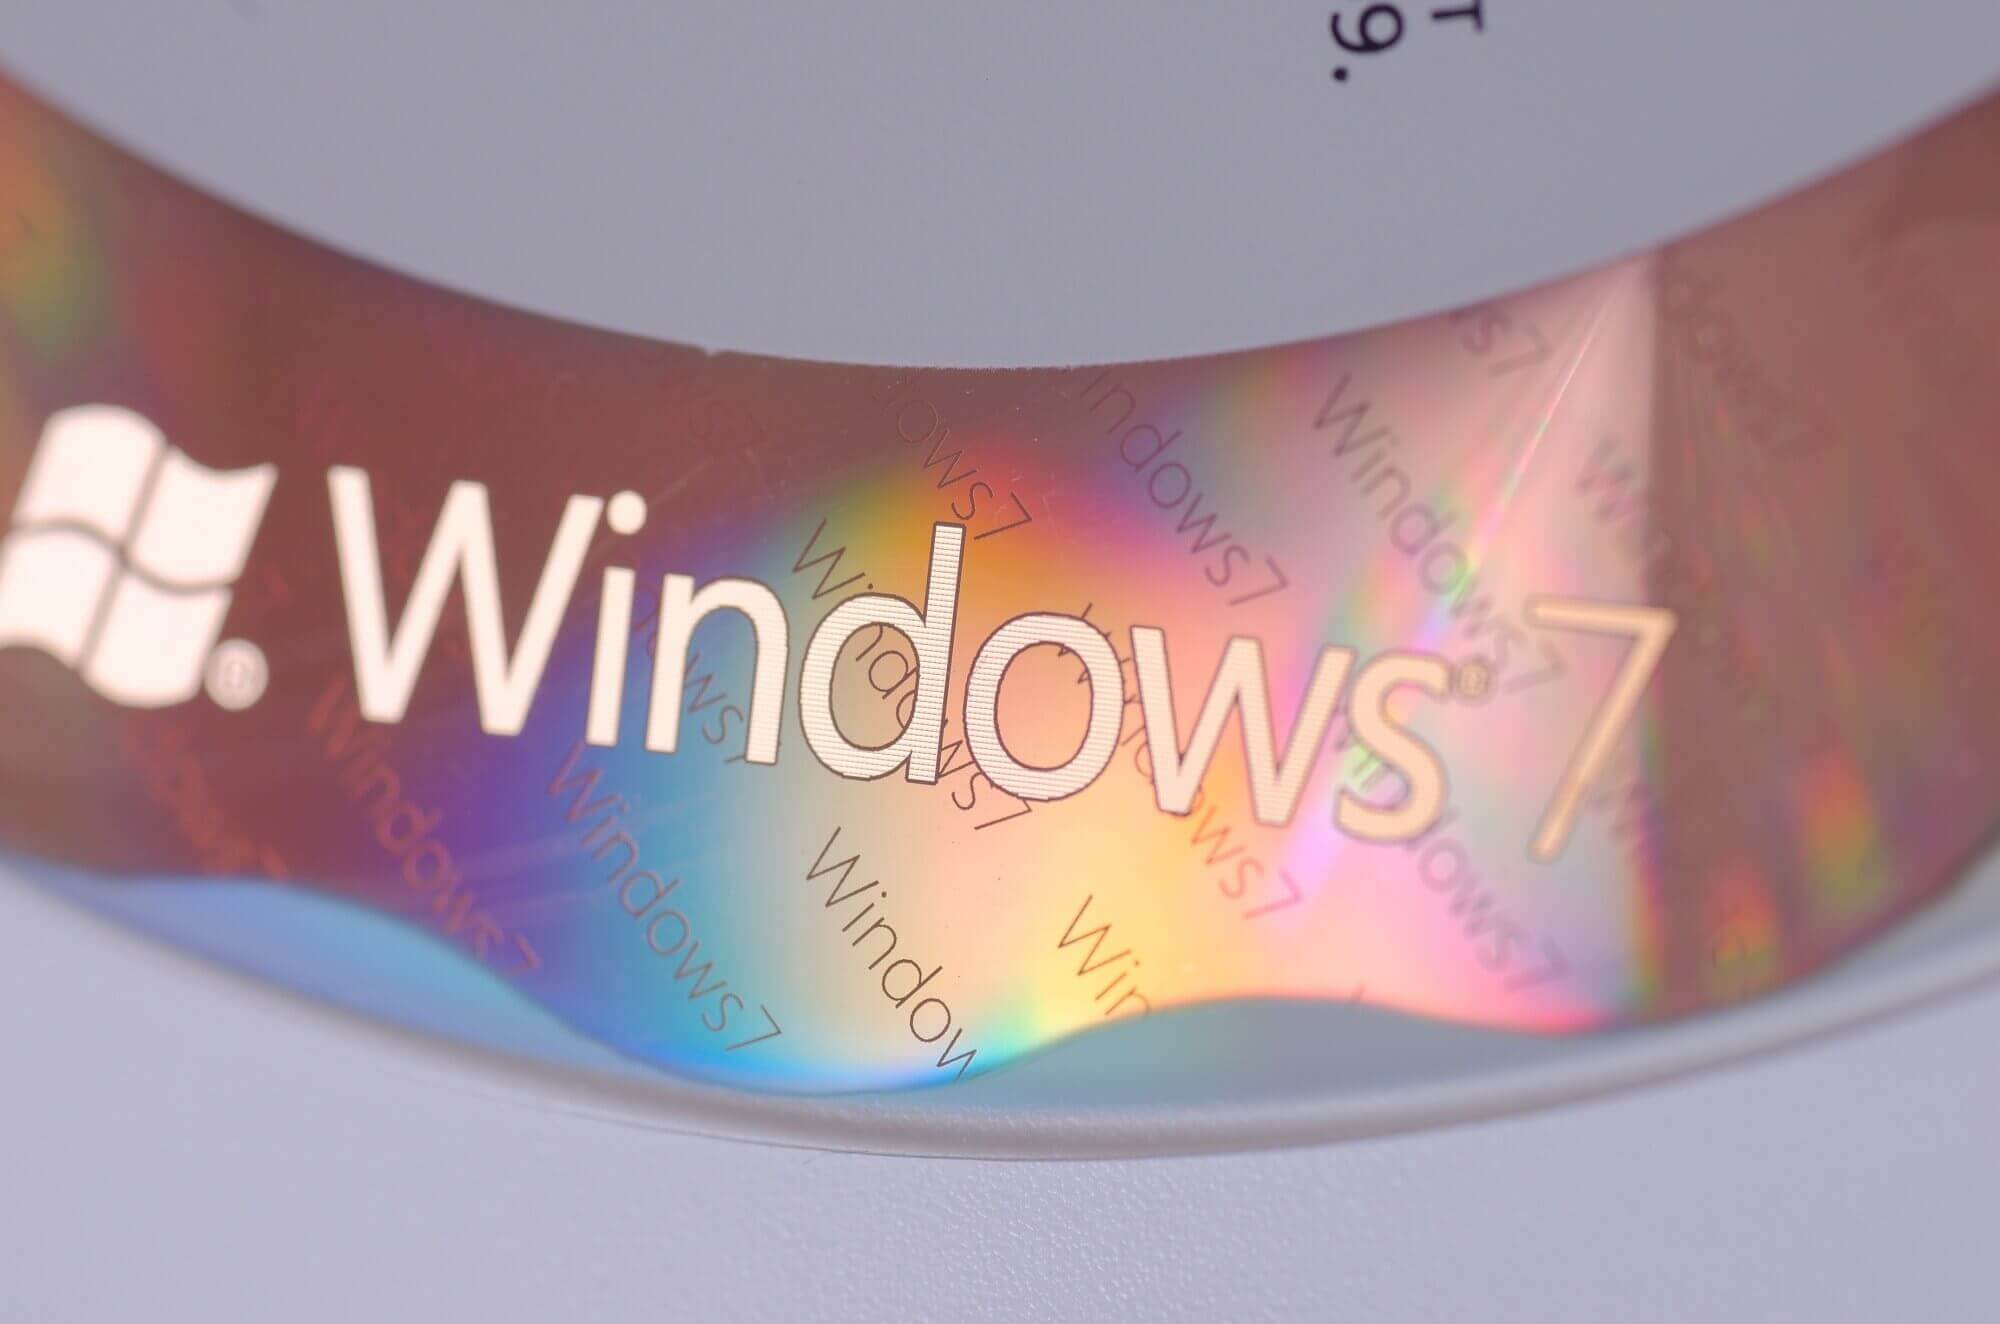 UK intelligence agency warns against using Windows 7 for internet banking, email as Microsoft's OS reaches EOL